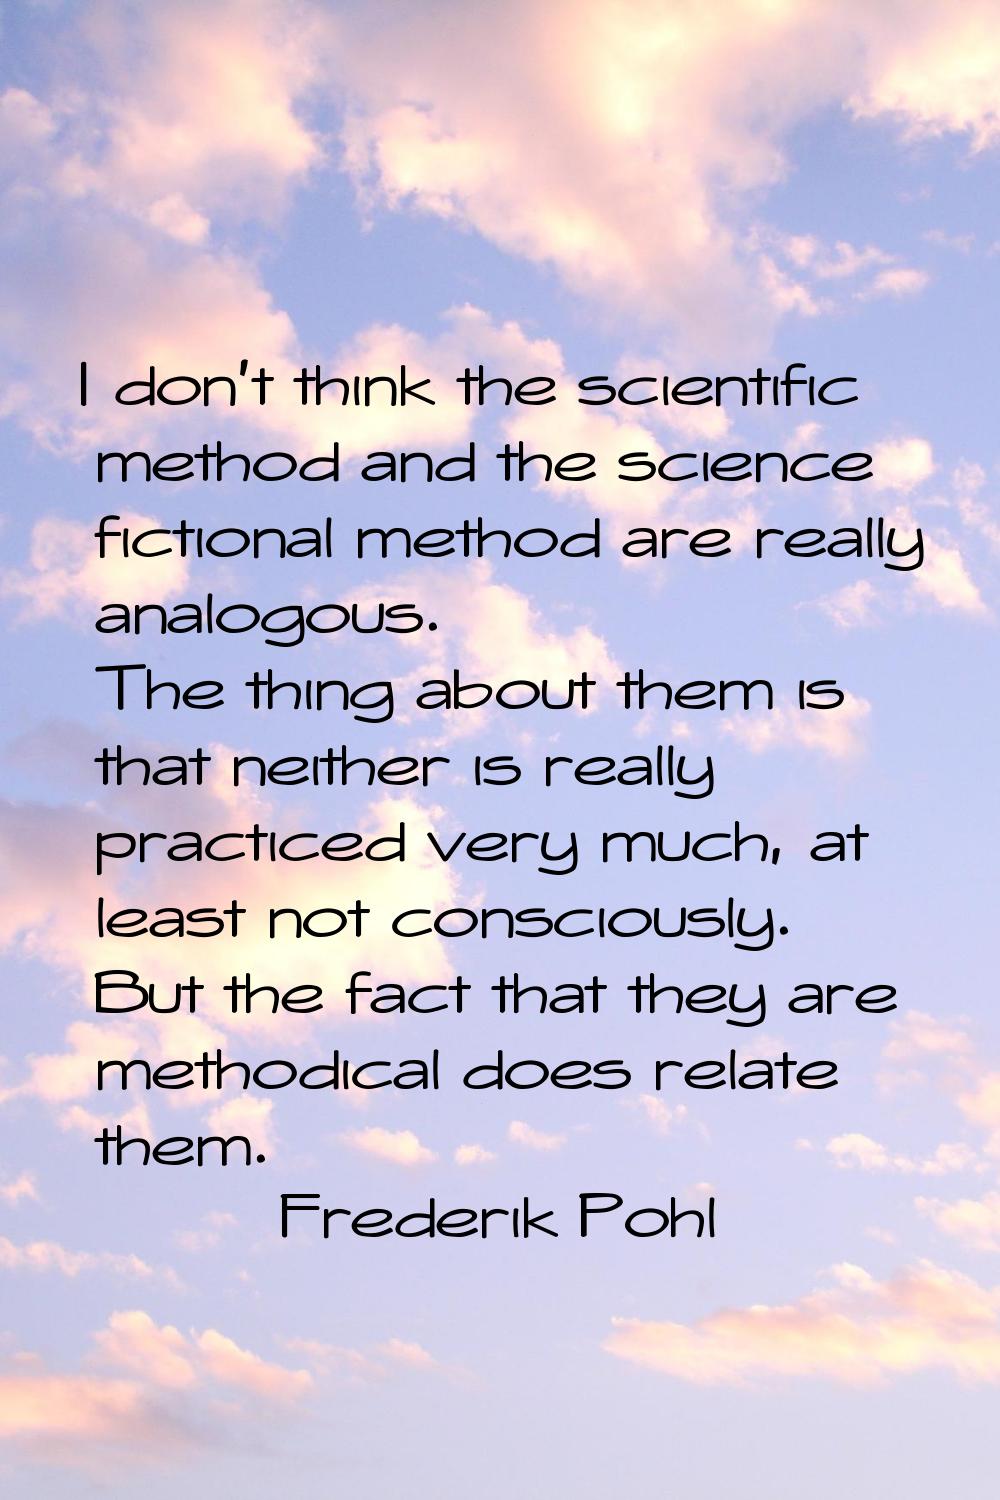 I don't think the scientific method and the science fictional method are really analogous. The thin